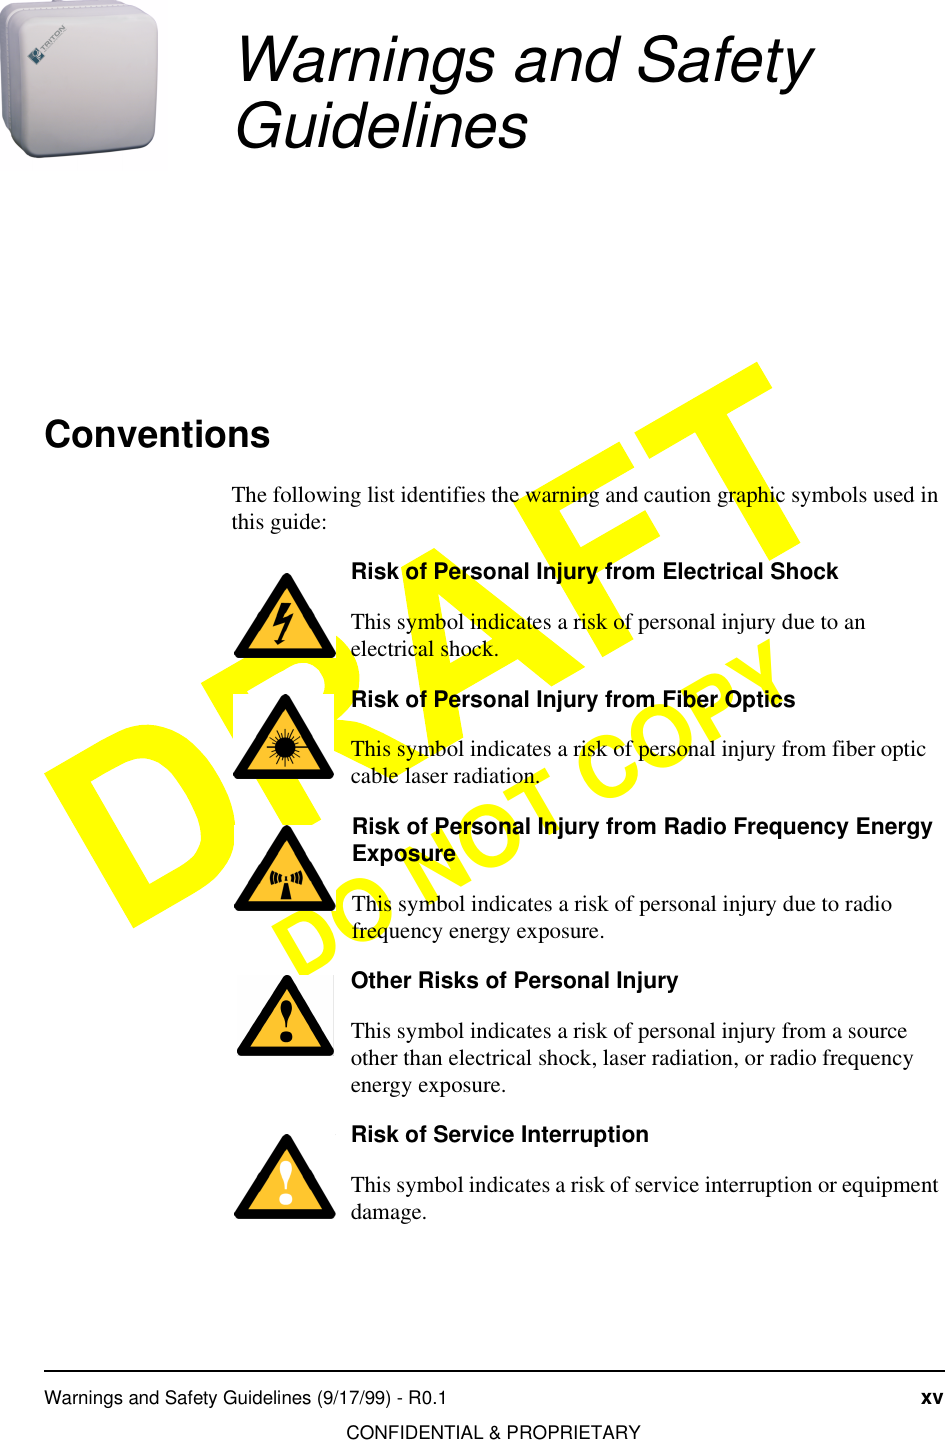 Warnings and Safety Guidelines (9/17/99) - R0.1 xvCONFIDENTIAL &amp; PROPRIETARYDO NOT COPYWarnings and Safety GuidelinesConventionsThe following list identifies the warning and caution graphic symbols used in this guide:Risk of Personal Injury from Electrical ShockThis symbol indicates a risk of personal injury due to an electrical shock.Risk of Personal Injury from Fiber OpticsThis symbol indicates a risk of personal injury from fiber optic cable laser radiation.Risk of Personal Injury from Radio Frequency Energy ExposureThis symbol indicates a risk of personal injury due to radio frequency energy exposure.Other Risks of Personal InjuryThis symbol indicates a risk of personal injury from a source other than electrical shock, laser radiation, or radio frequency energy exposure.Risk of Service InterruptionThis symbol indicates a risk of service interruption or equipment damage.